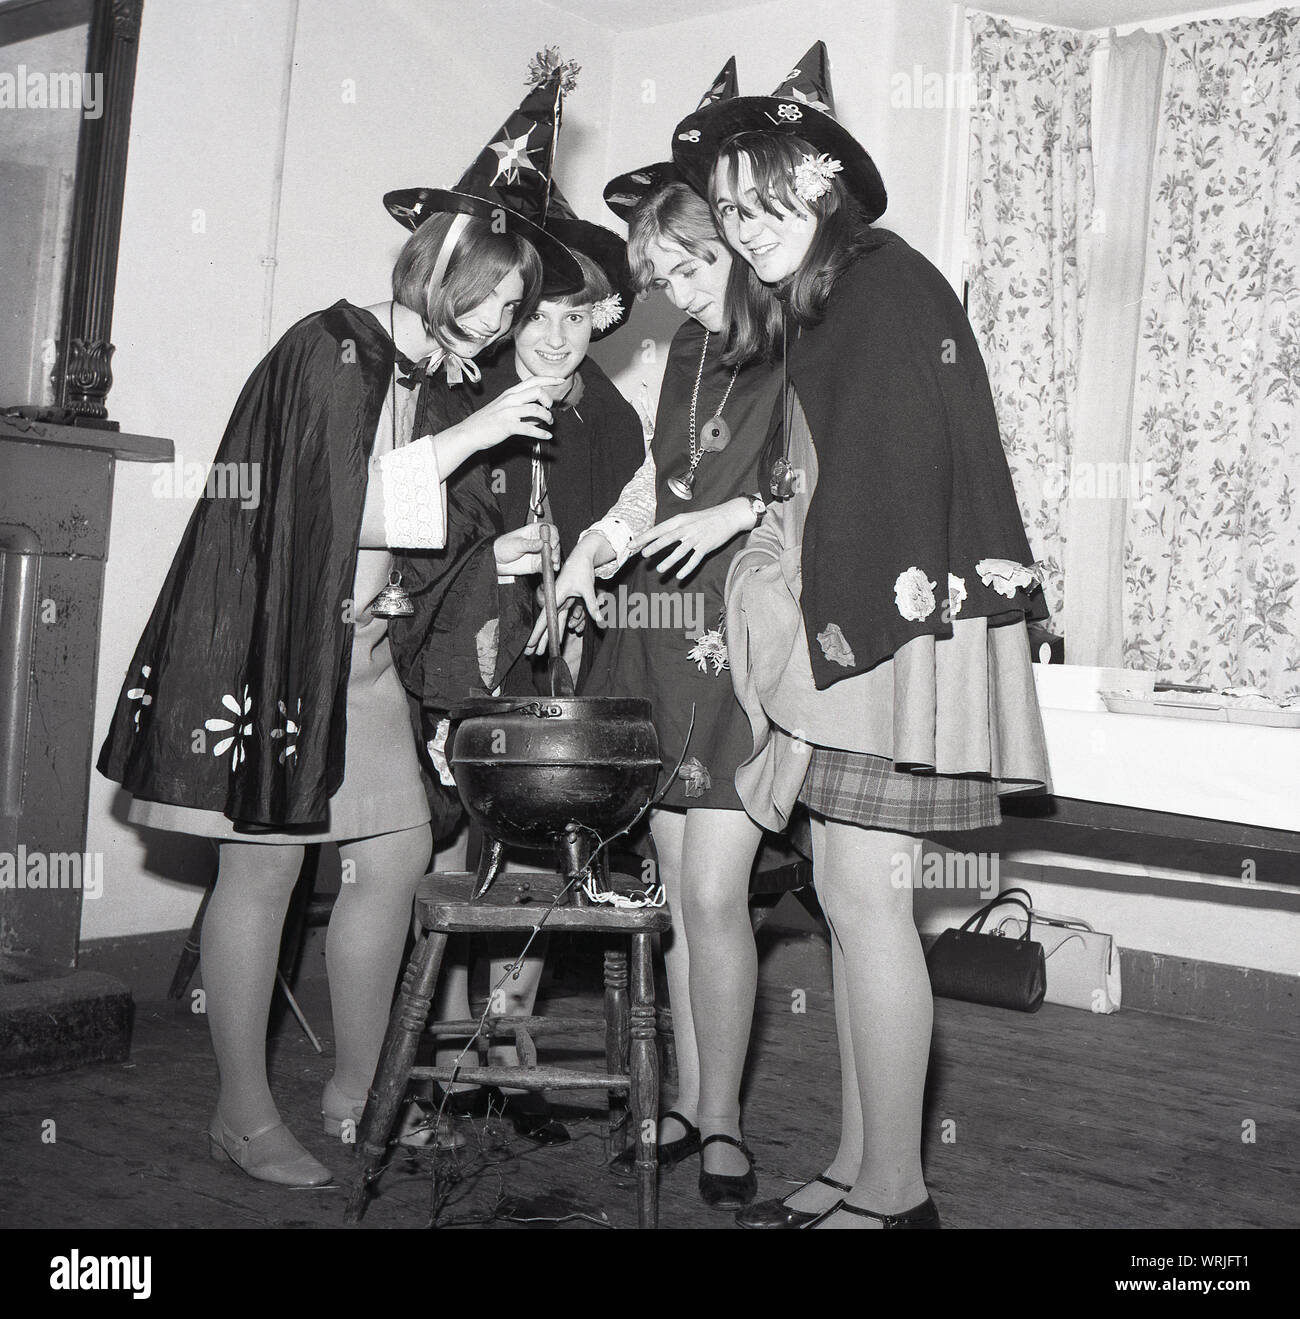 1967, historical, four teenage girls dressed up in witches costumes - black  coats and pointed hats - standing in a room around a cast iron pot or  cauldron perched on a stool,